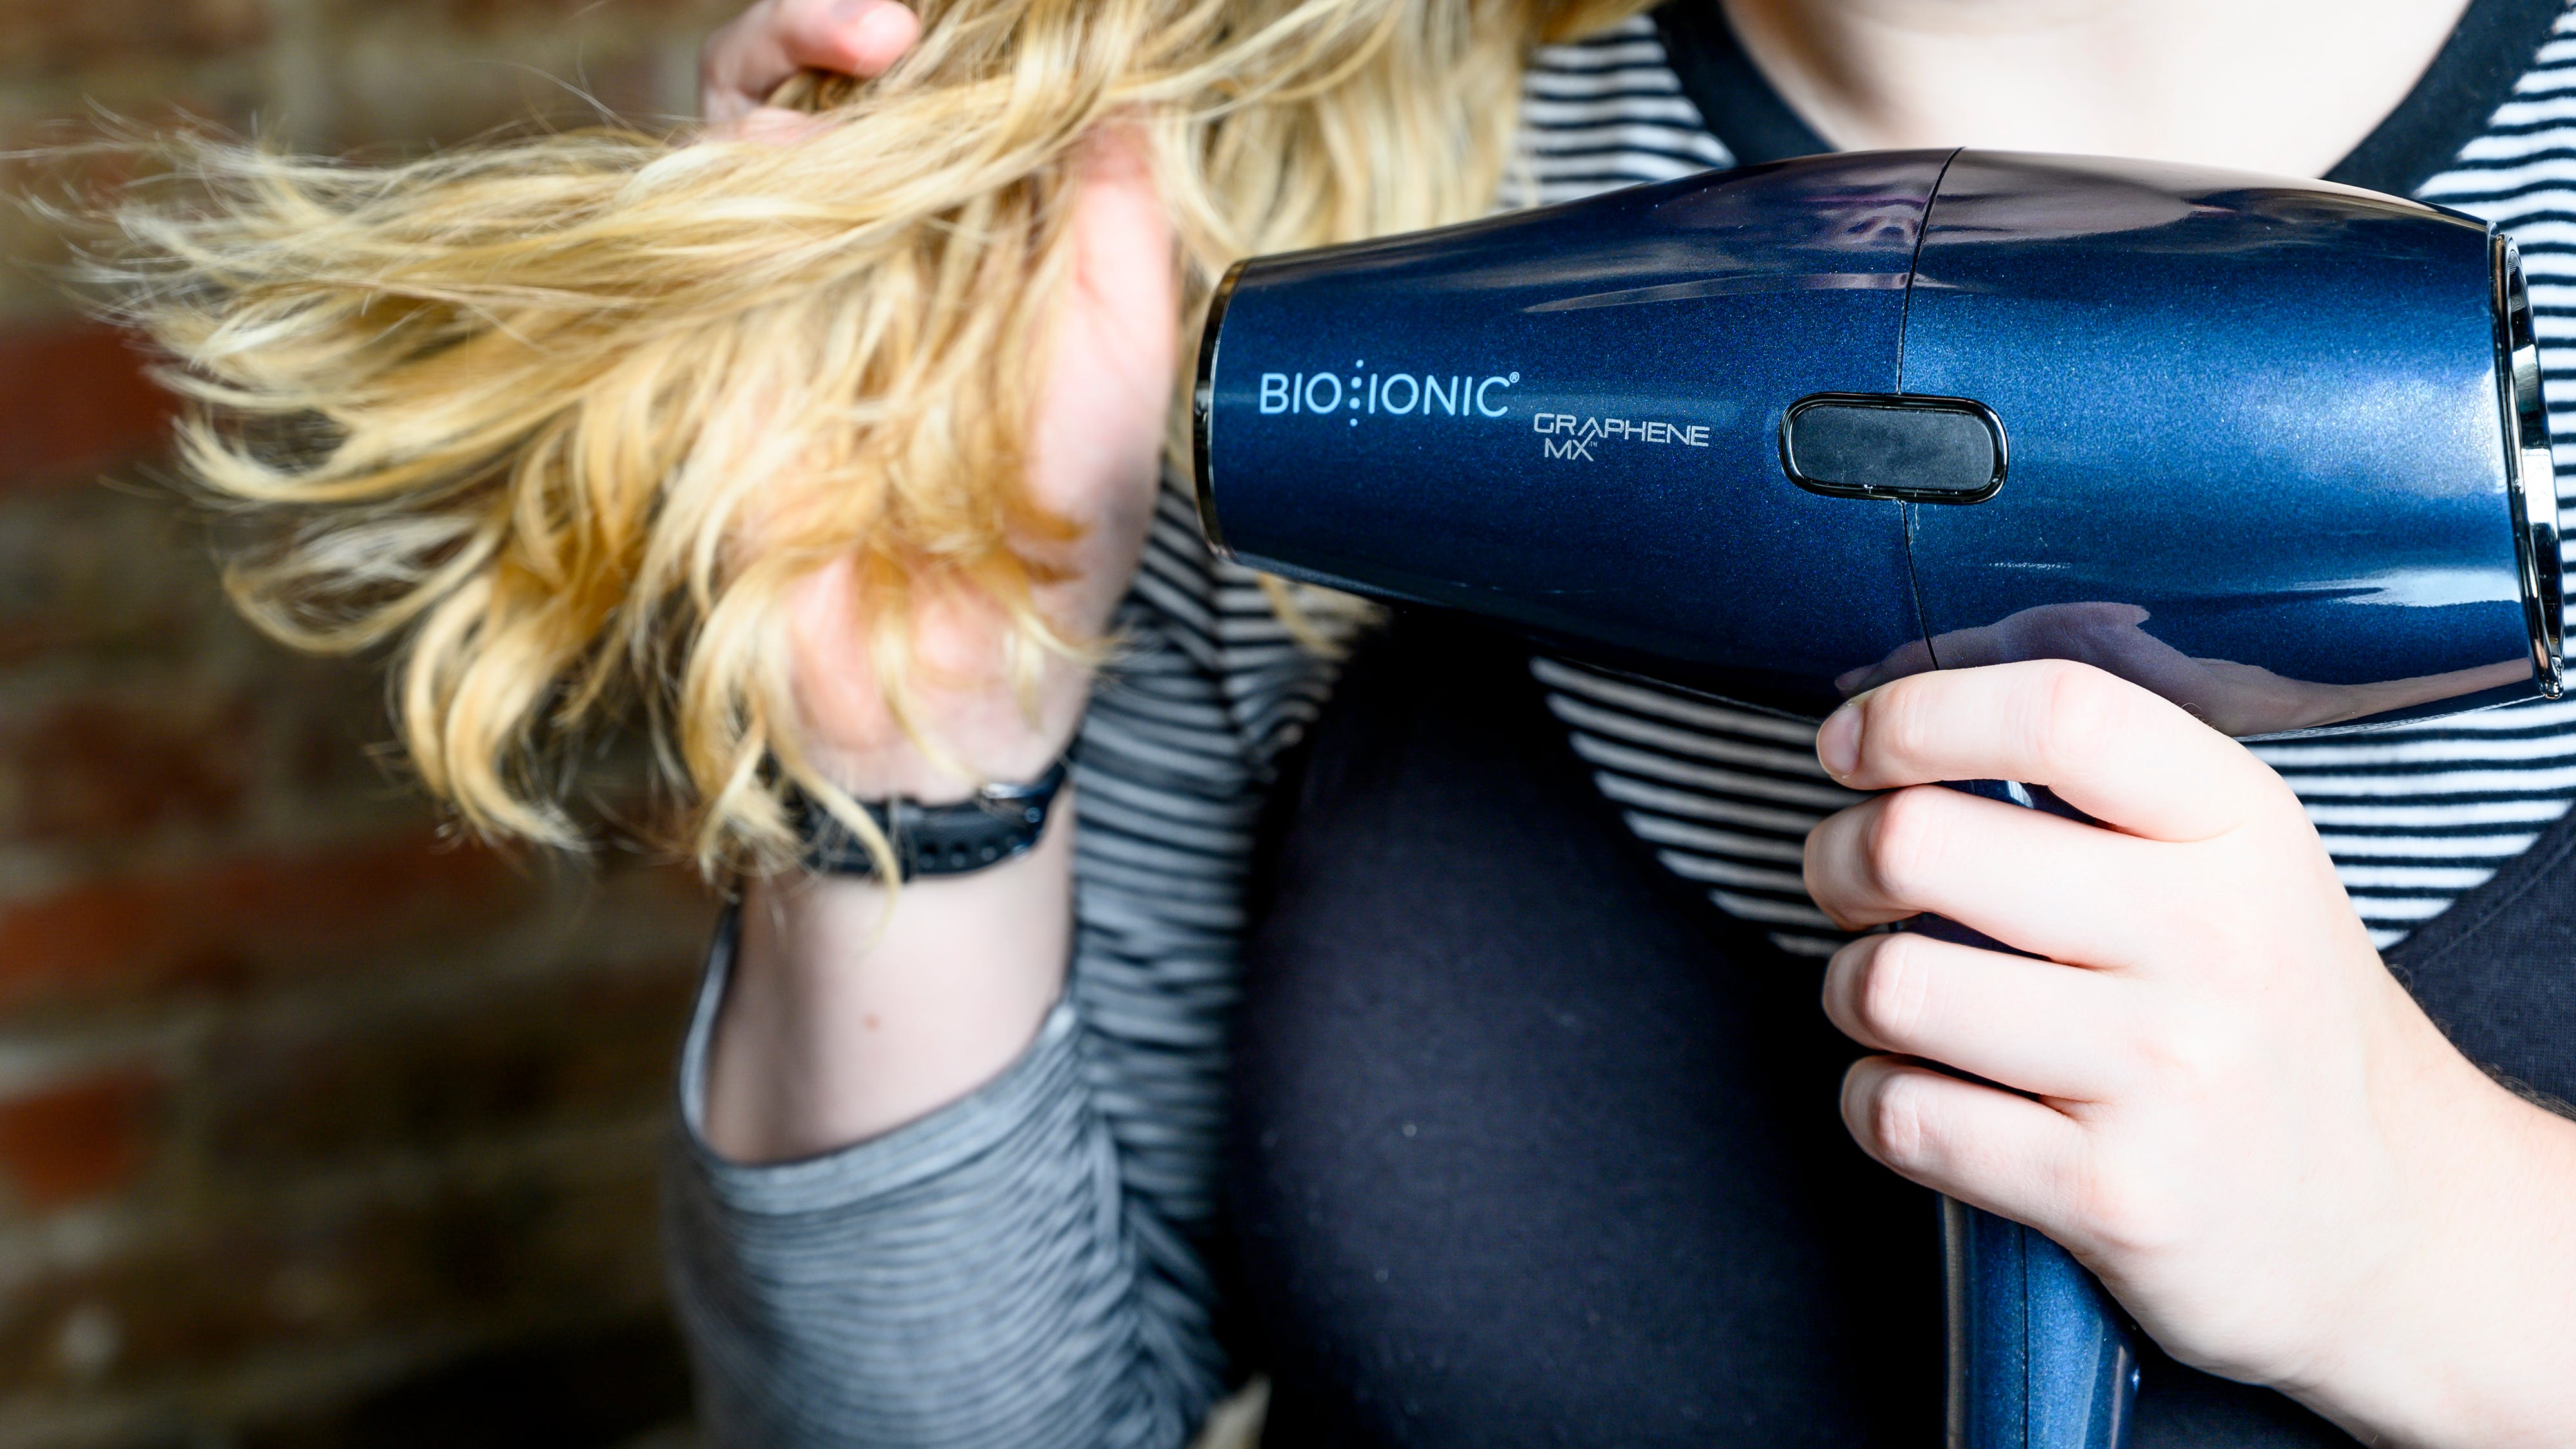 Get the Bio Ionic hair dryer at an incredible price at Sephora